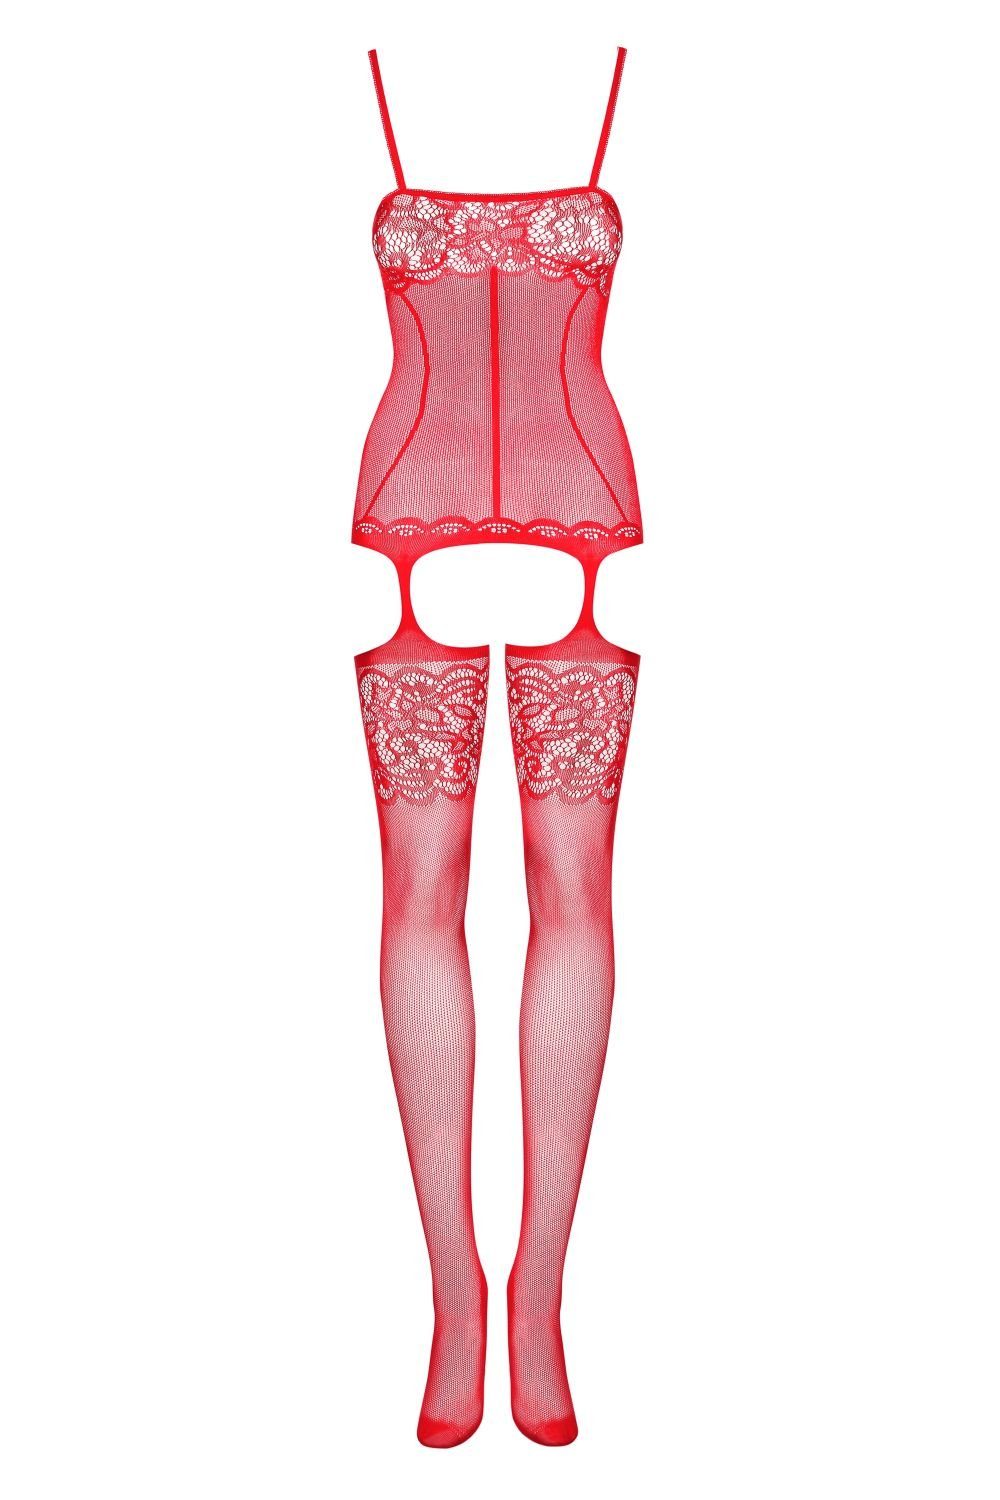 Damen Bodies Obsessive Body Straps-Catsuit rot offen Bodystocking transparent